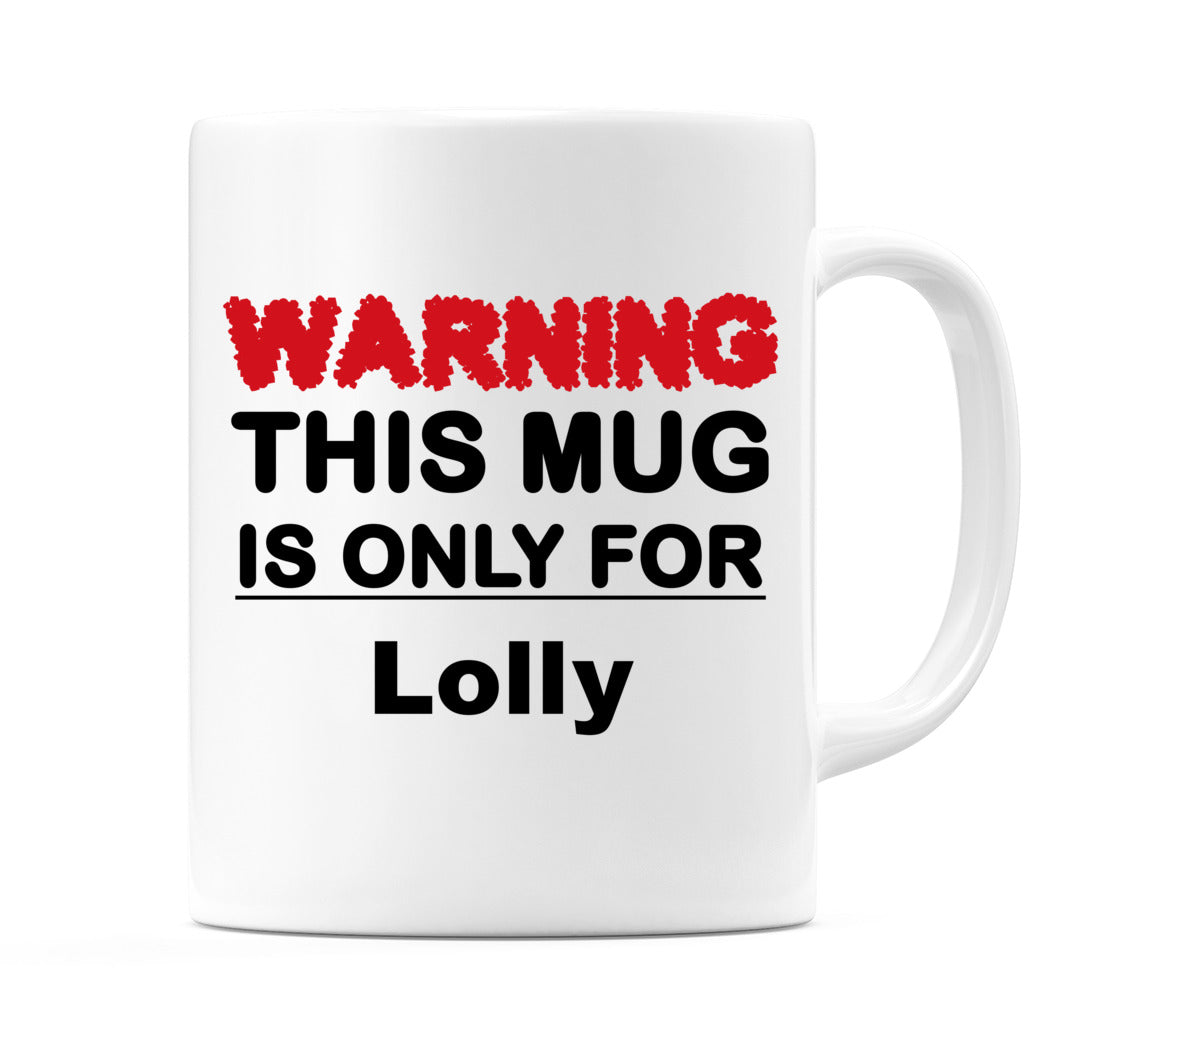 Warning This Mug is ONLY for Lolly Mug